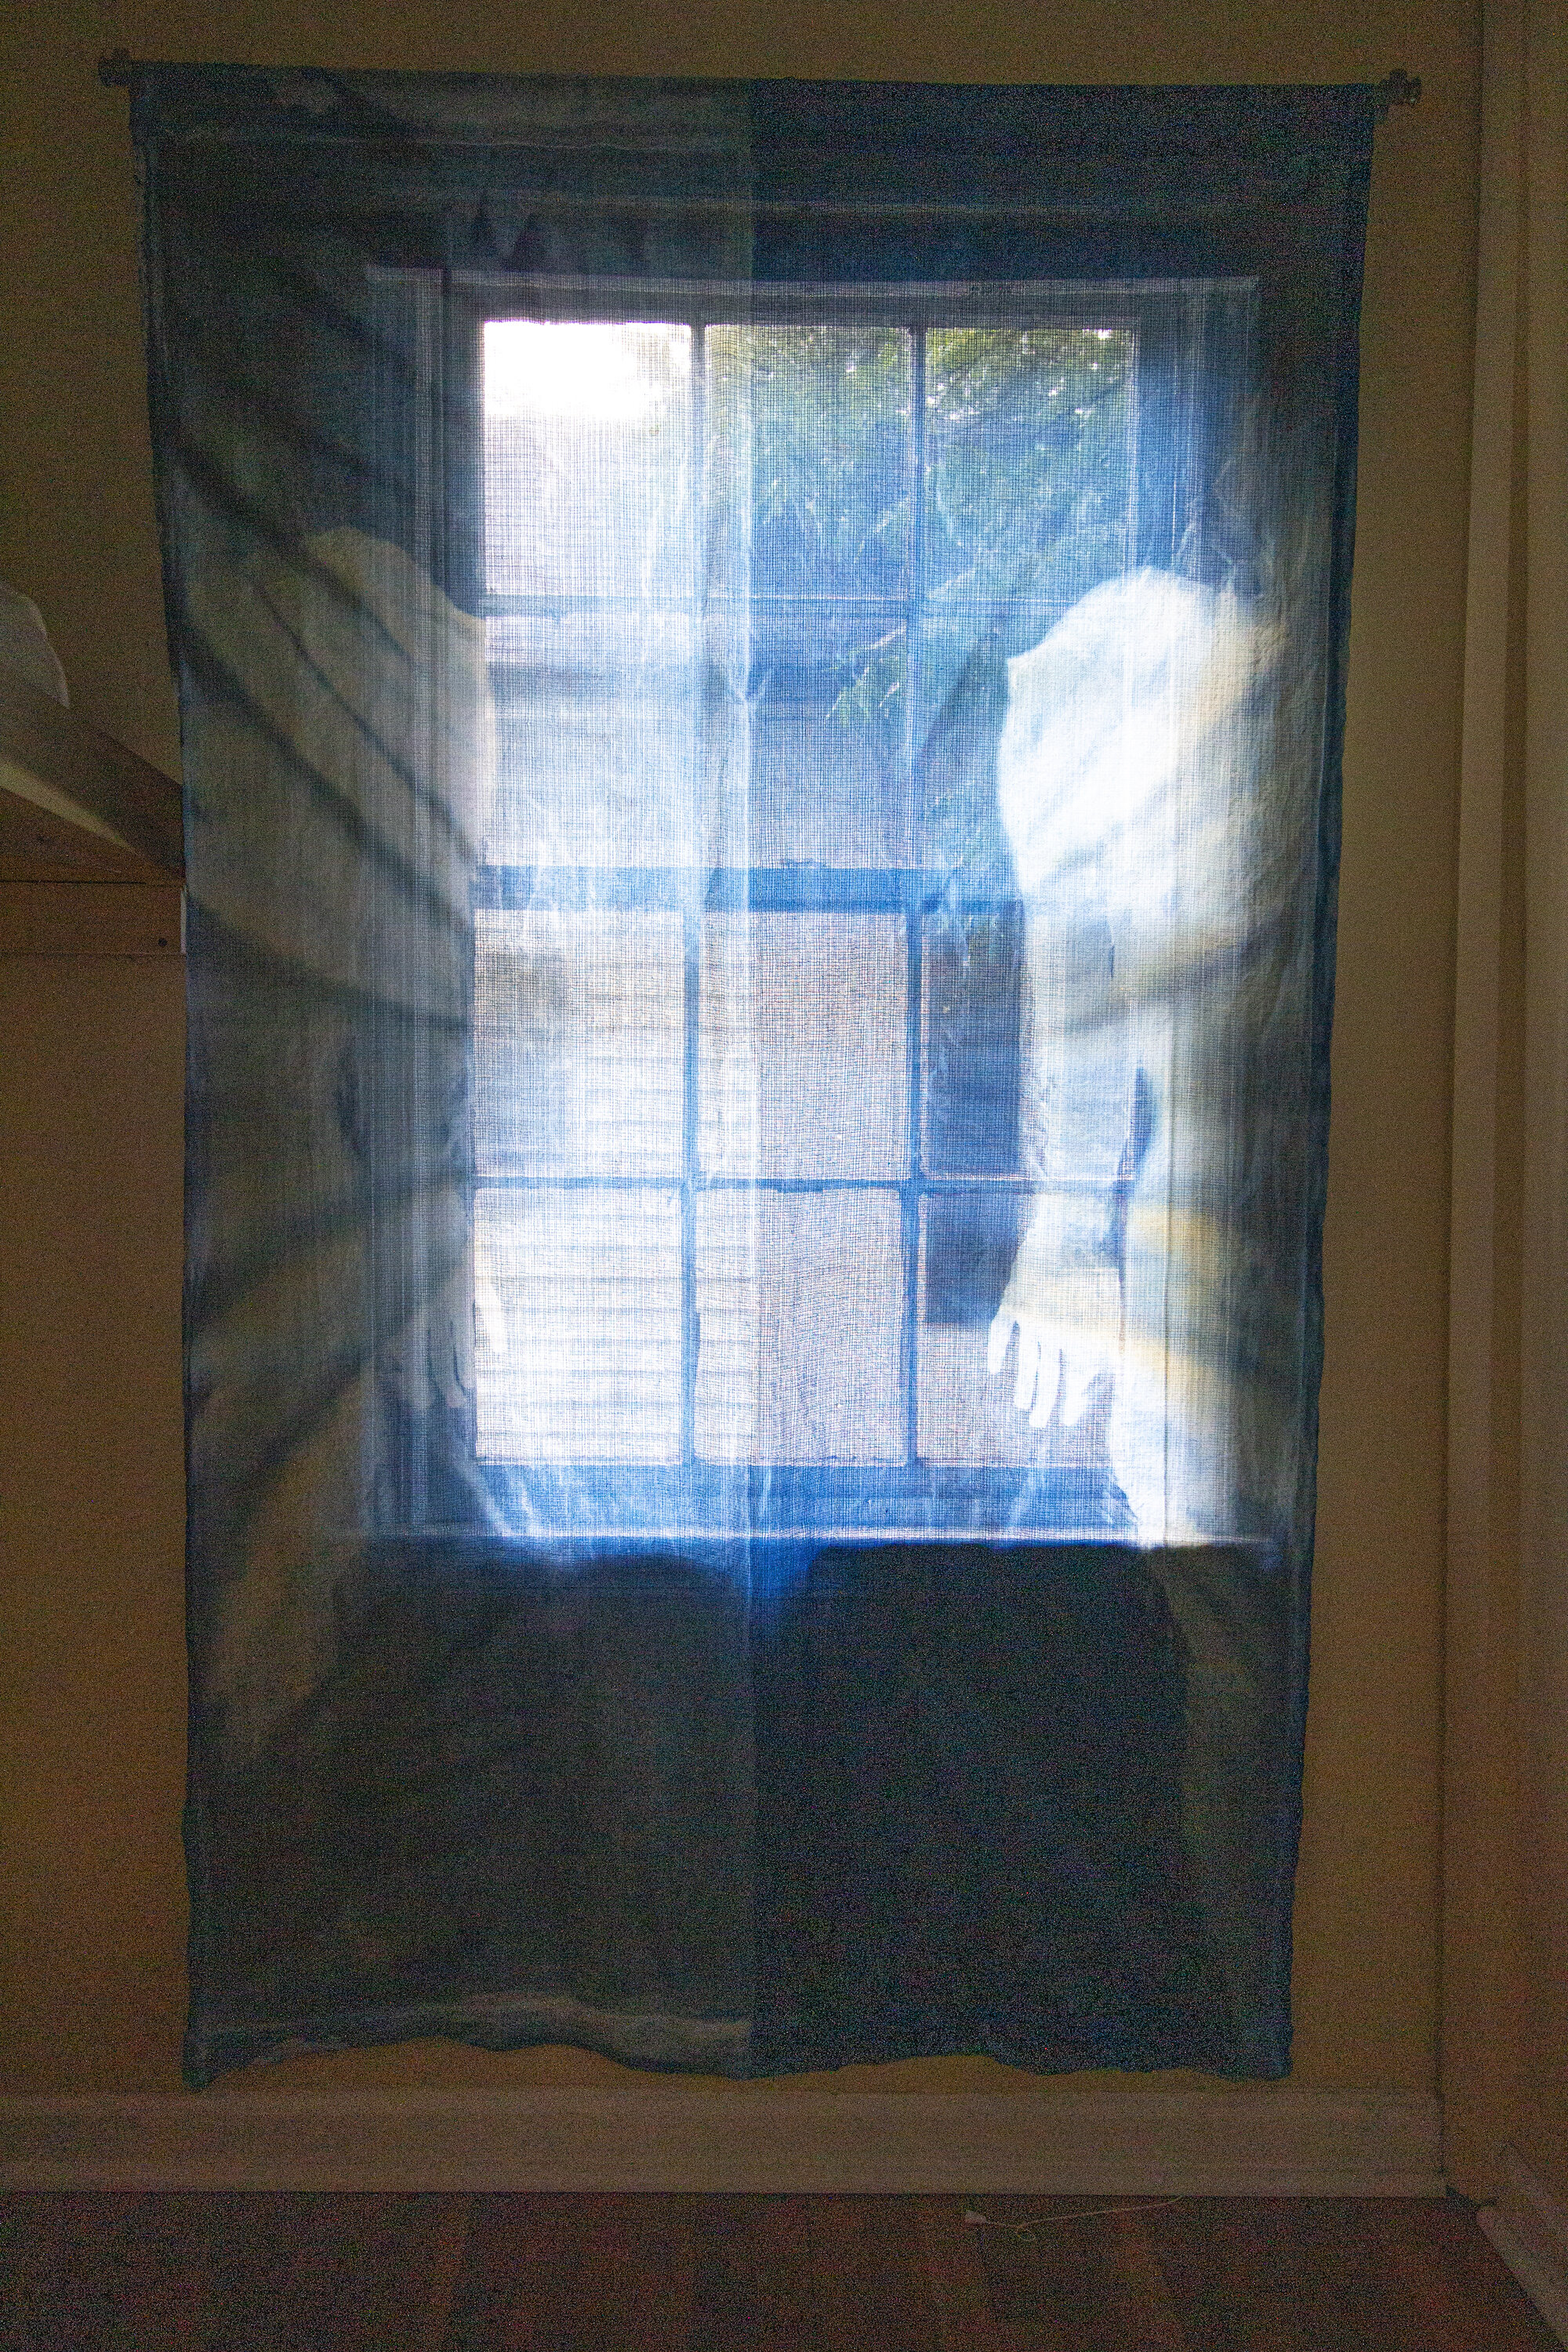 Mirror Image [late afternoon], 2020, cotton curtain, cyanotype solution, curtain rod, and hardware, 55 x 84 inches